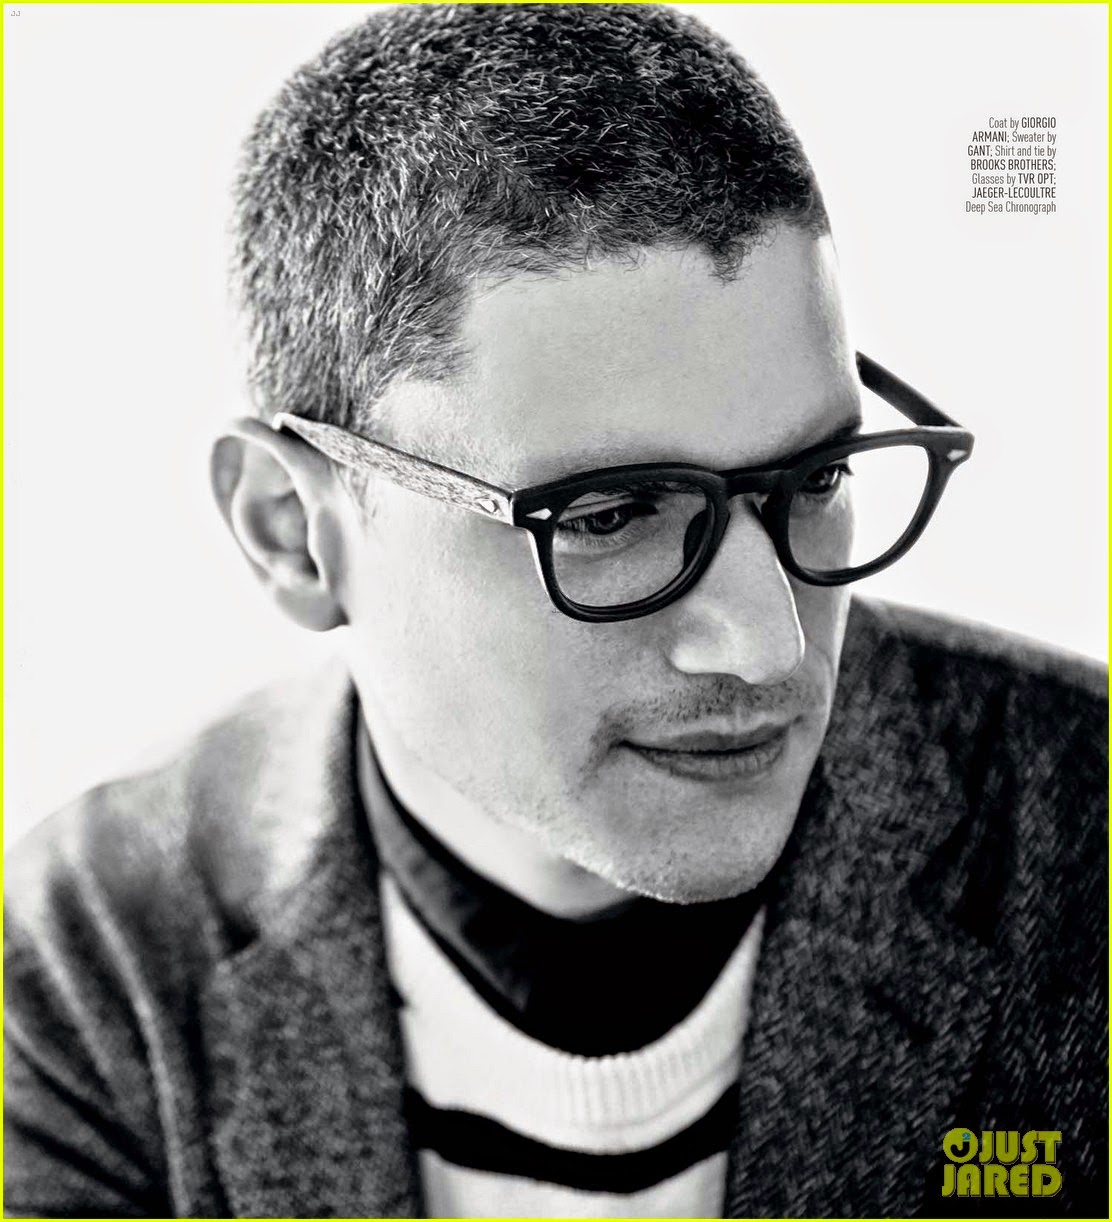 Wentworth Miller with Love: A Classy Augustman!